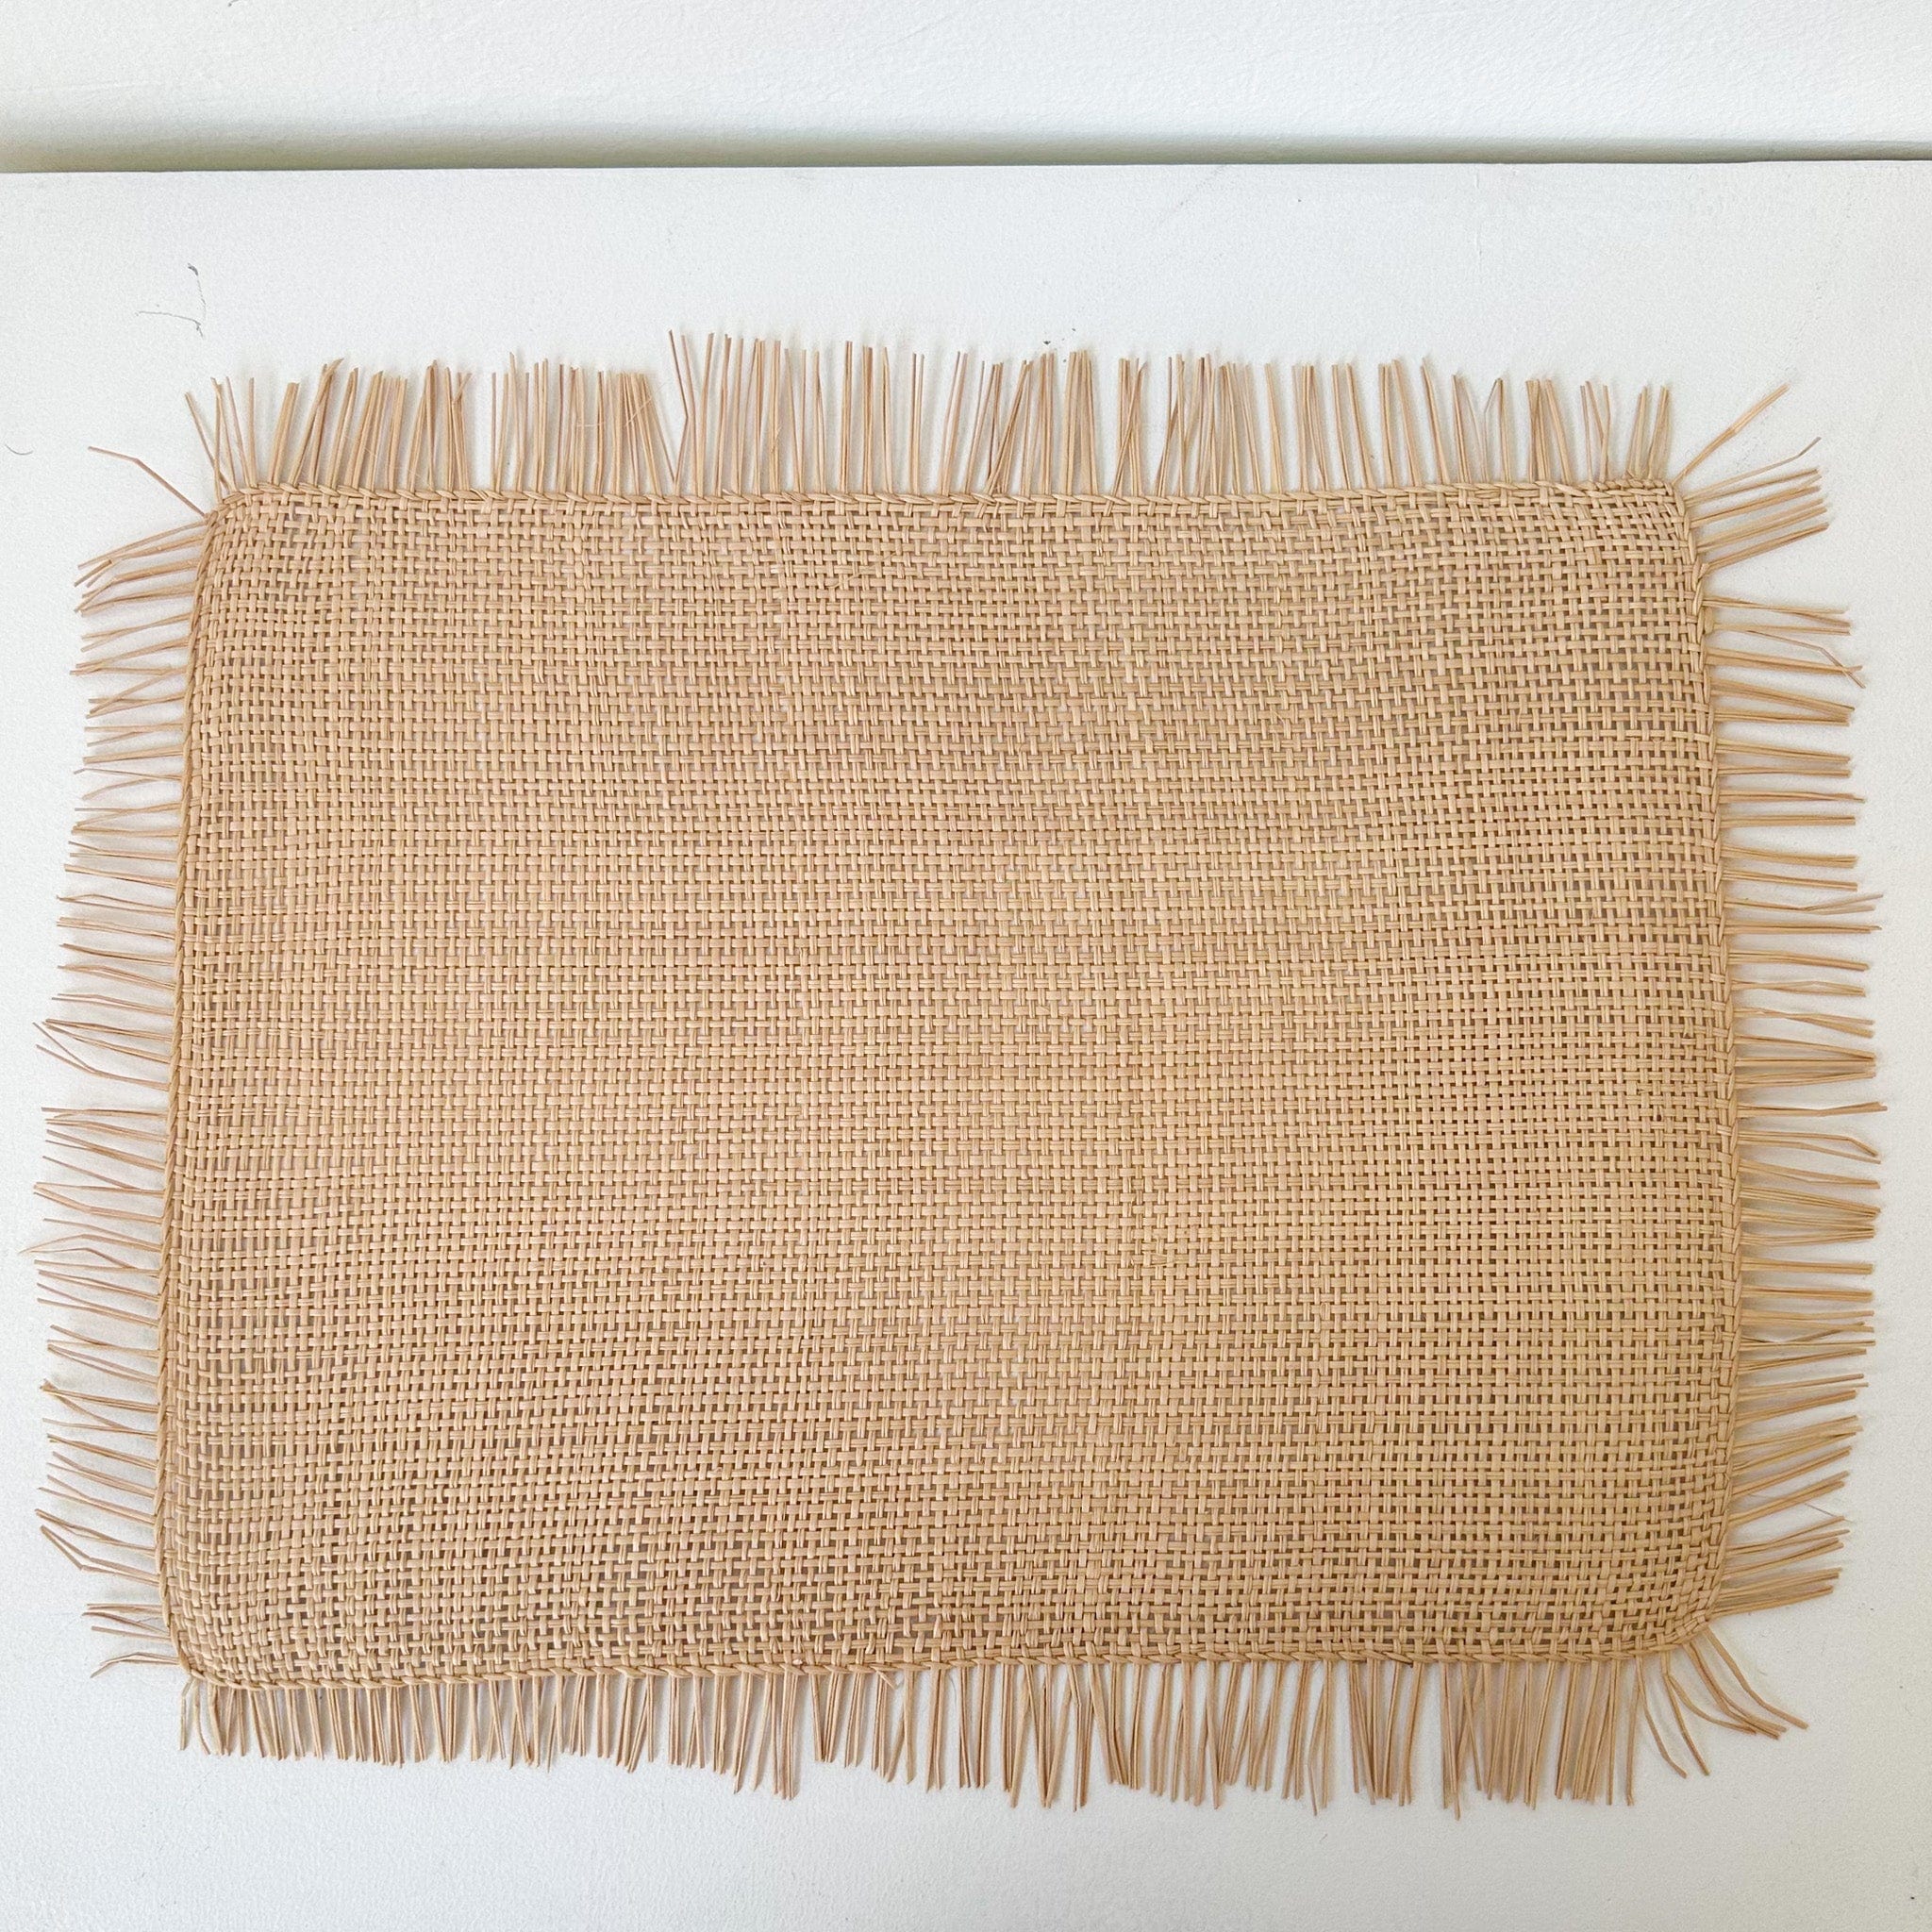 Guanabana Placemats Straw placemat in Natural with Fringes by Guanabana